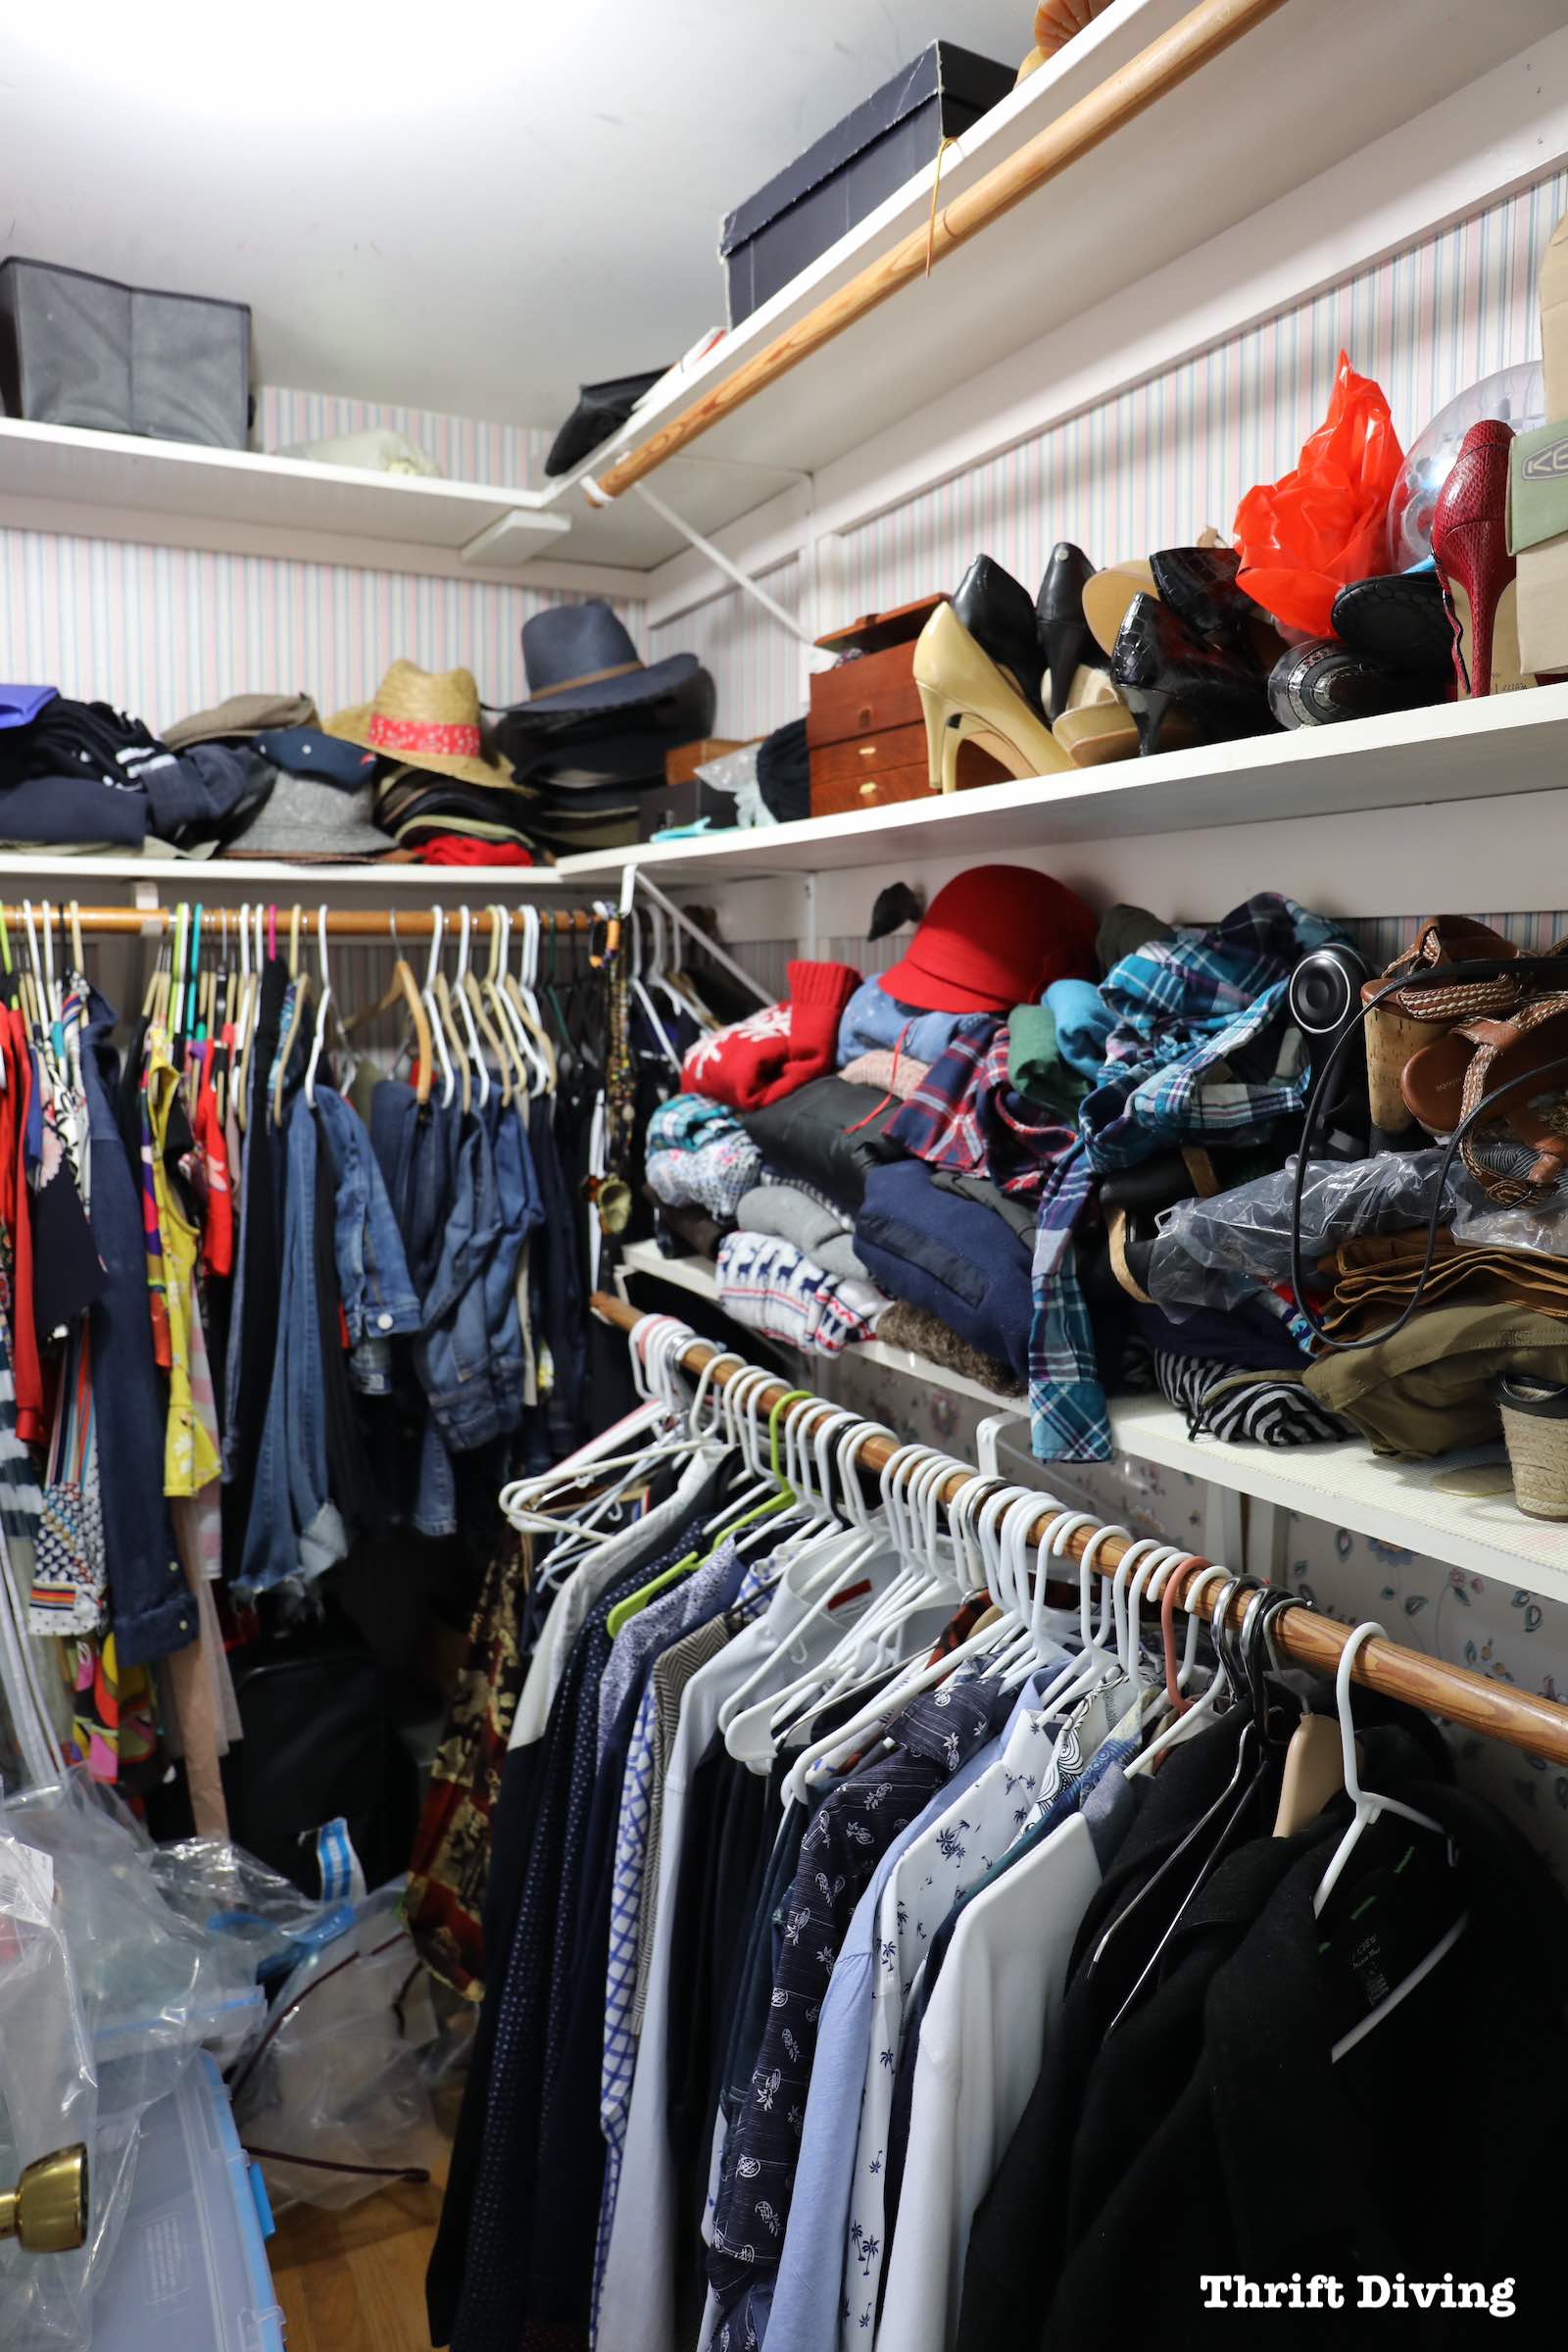 How to Build a Walk-in Closet Organizer From Scratch - This is the "BEFORE" of the messy closet! - Thrift Diving